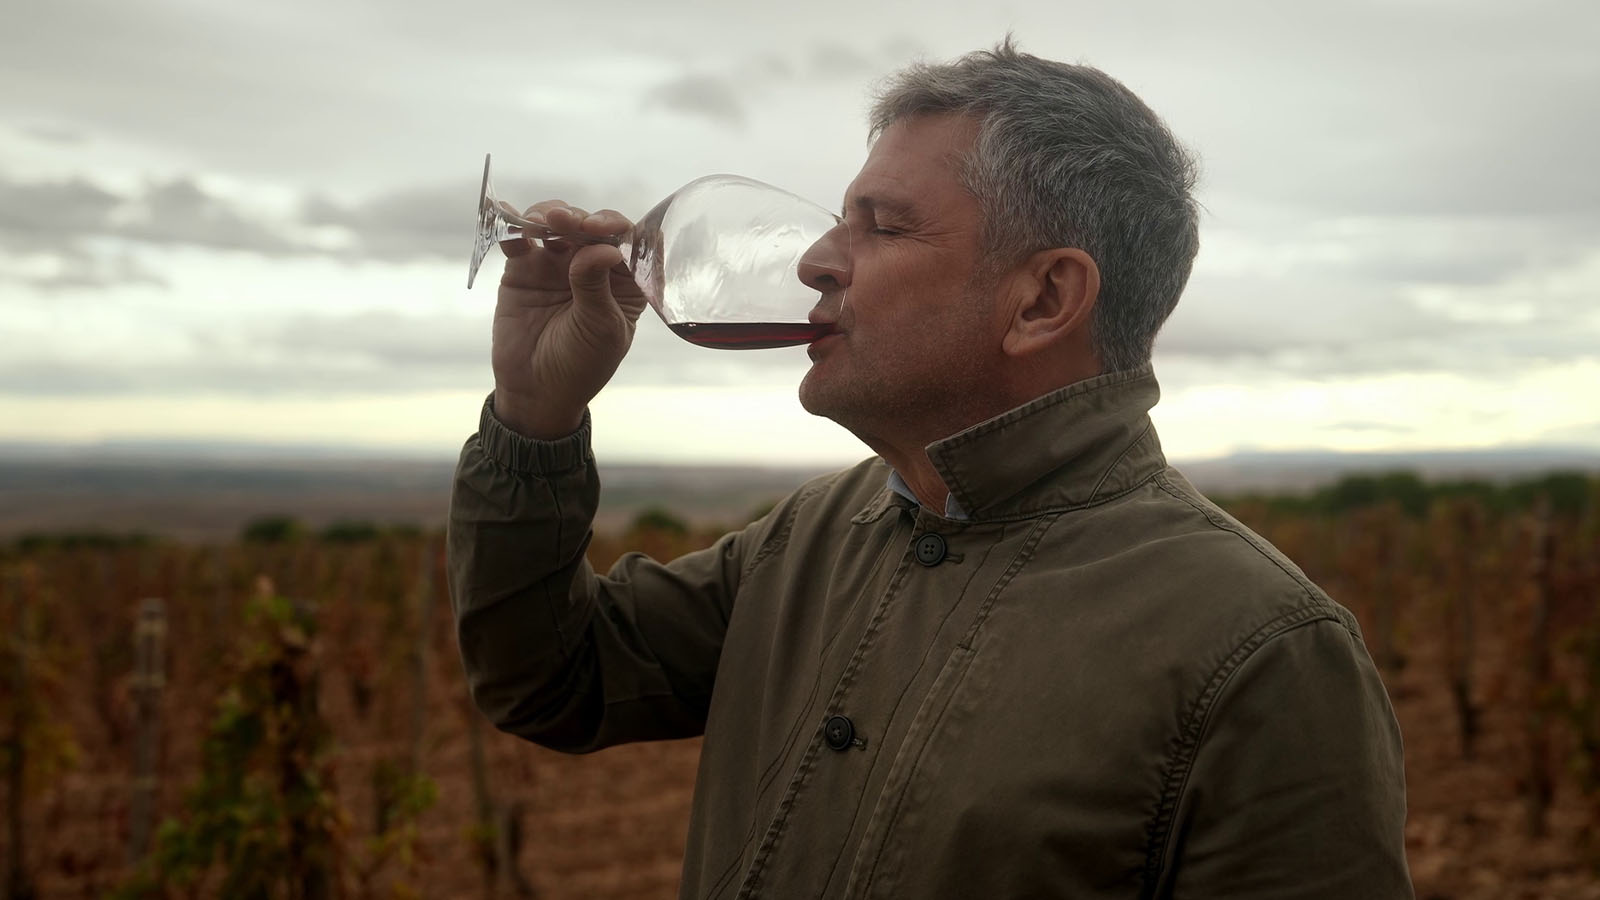 Rioja: The Land of a Thousand Wines